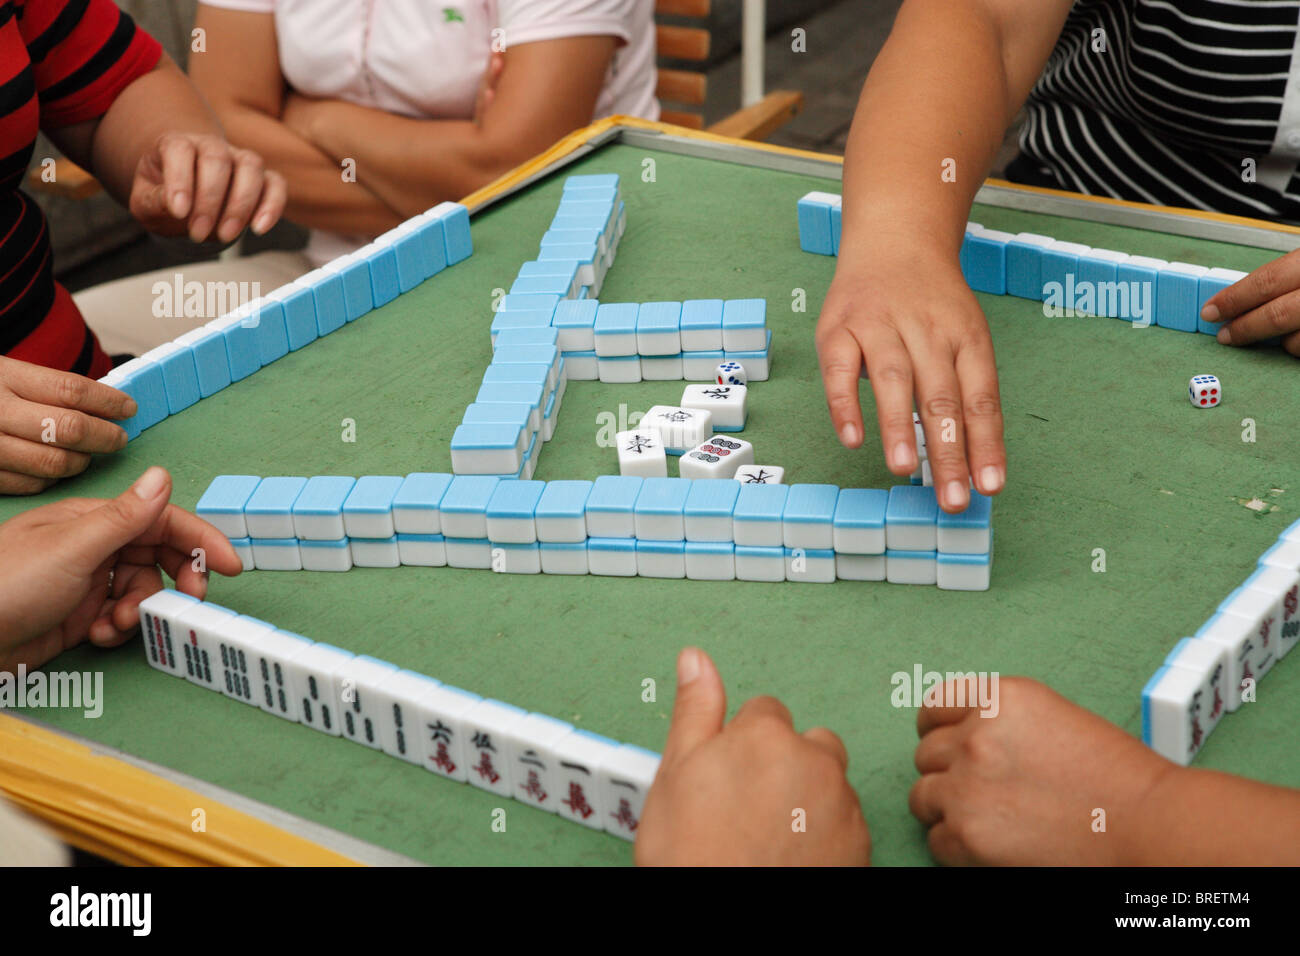 A Mahjong game in progress on a street in Shanghai, China. Stock Photo